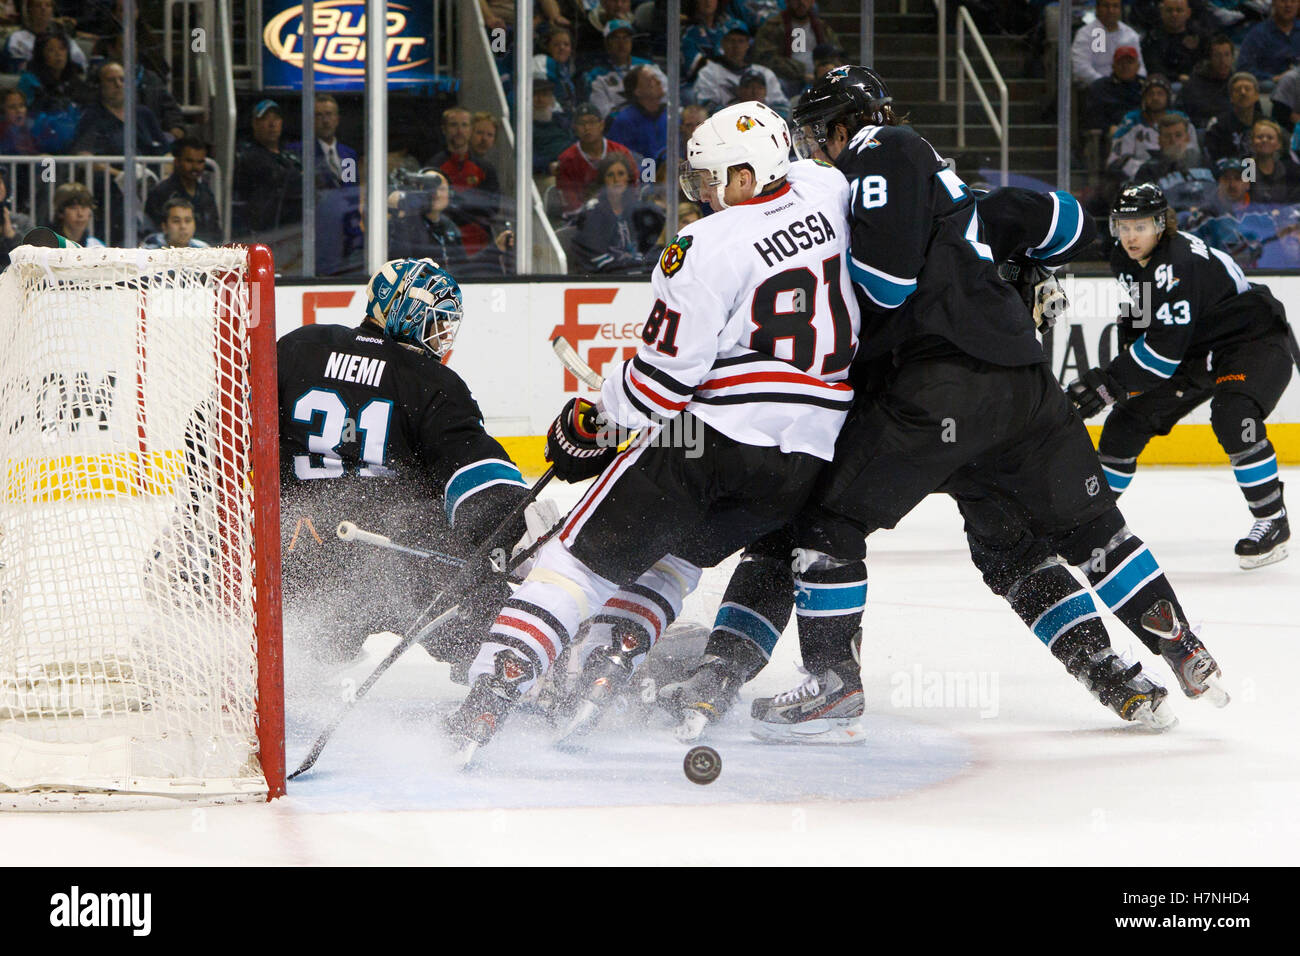 Feb 10, 2012; San Jose, CA, USA; San Jose Sharks goalie Antti Niemi (31) saves a shot in front of Chicago Blackhawks right wing Marian Hossa (81) during the second period at HP Pavilion. Stock Photo